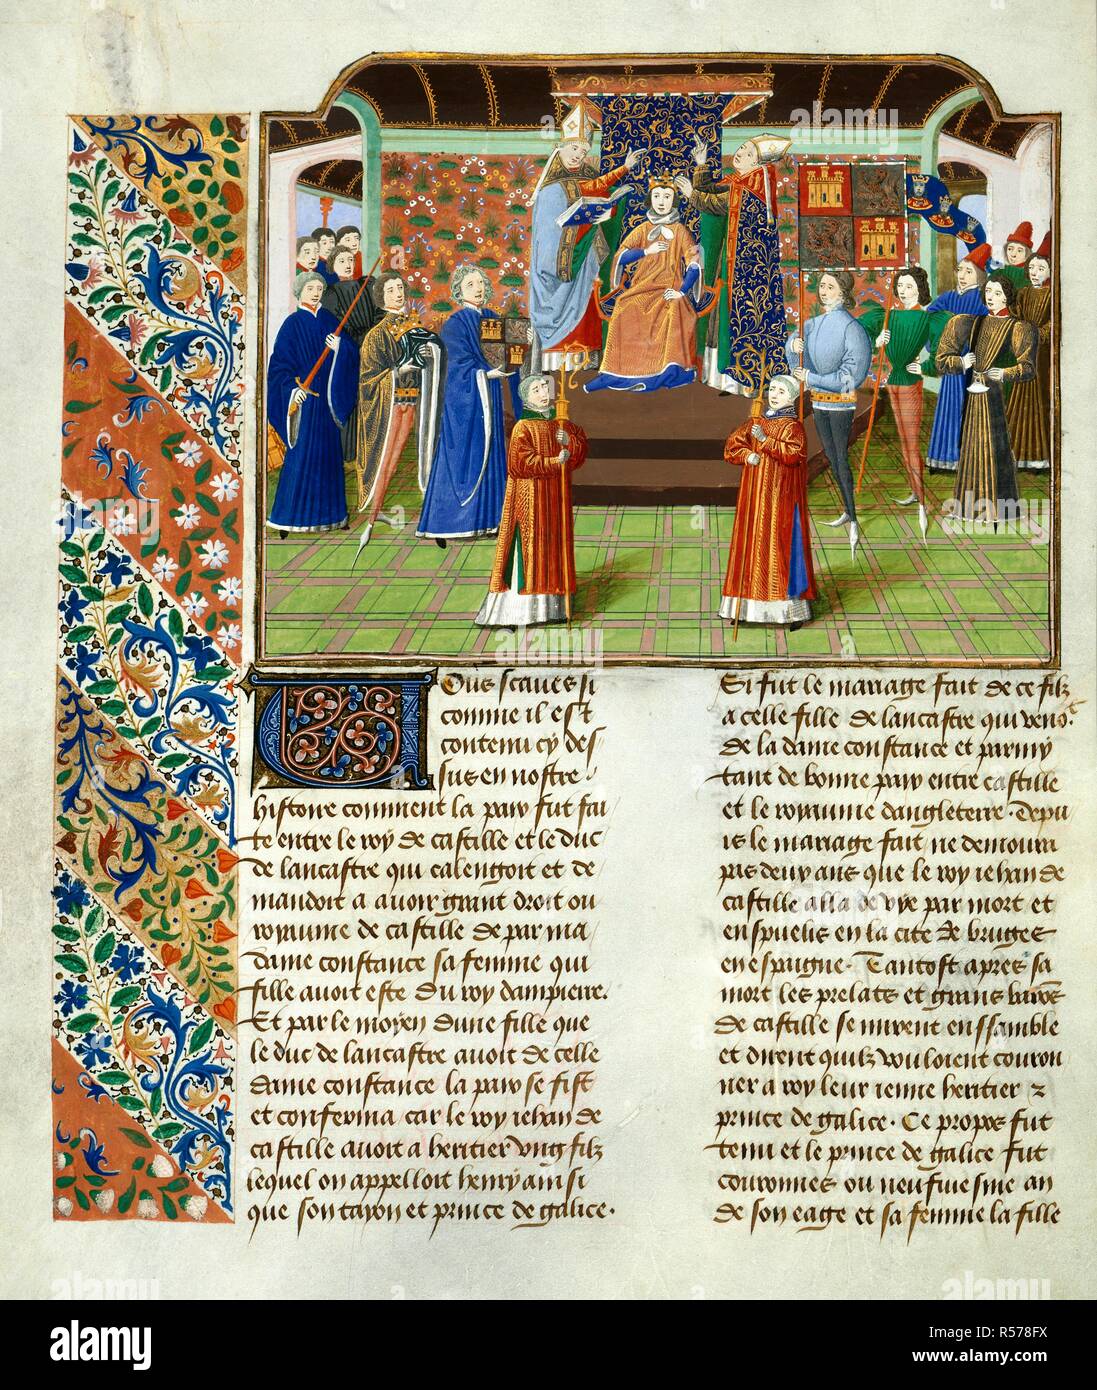 Coronation of King Henry of Castile. Chroniques, Vol. IV, part 1 (the 'Harley Froissart'). (Froissart's Chronicles). S. Netherlands [Bruges]; 1470-1475. [Whole folio] Coronation of King Henry of Castile; with courtiers, one carrying a heraldic banner. Text beginning with decorated initial 'V'. Borders with foliate decoration  Image taken from Froissart's Chronicles [Volume IV, part 1].  Originally published/produced in S. Netherlands [Bruges]; 1470-1475. . Source: Harley 4379, f.112v. Language: French. Author: FROISSART, JEAN. Stock Photo